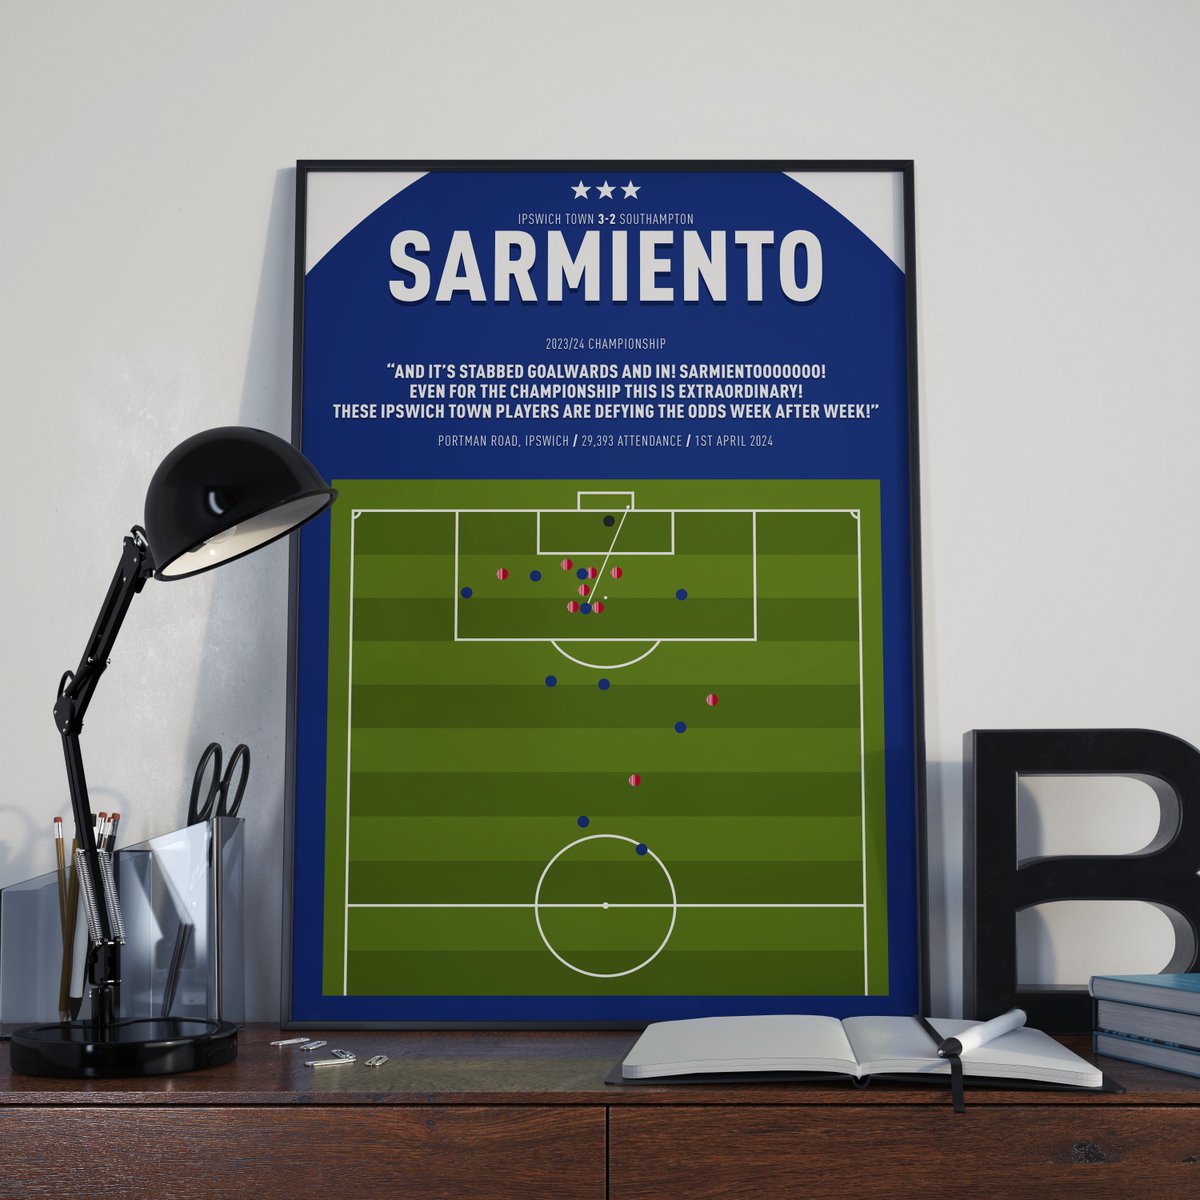 What. A. Comeback. 90+7! #ITFC Ipswich Town proving once again why they're on track for back to back promotions! Sarmiento's goal is now available as a print on our store! 🛒 pixelprintdesign.com/products/jerem…